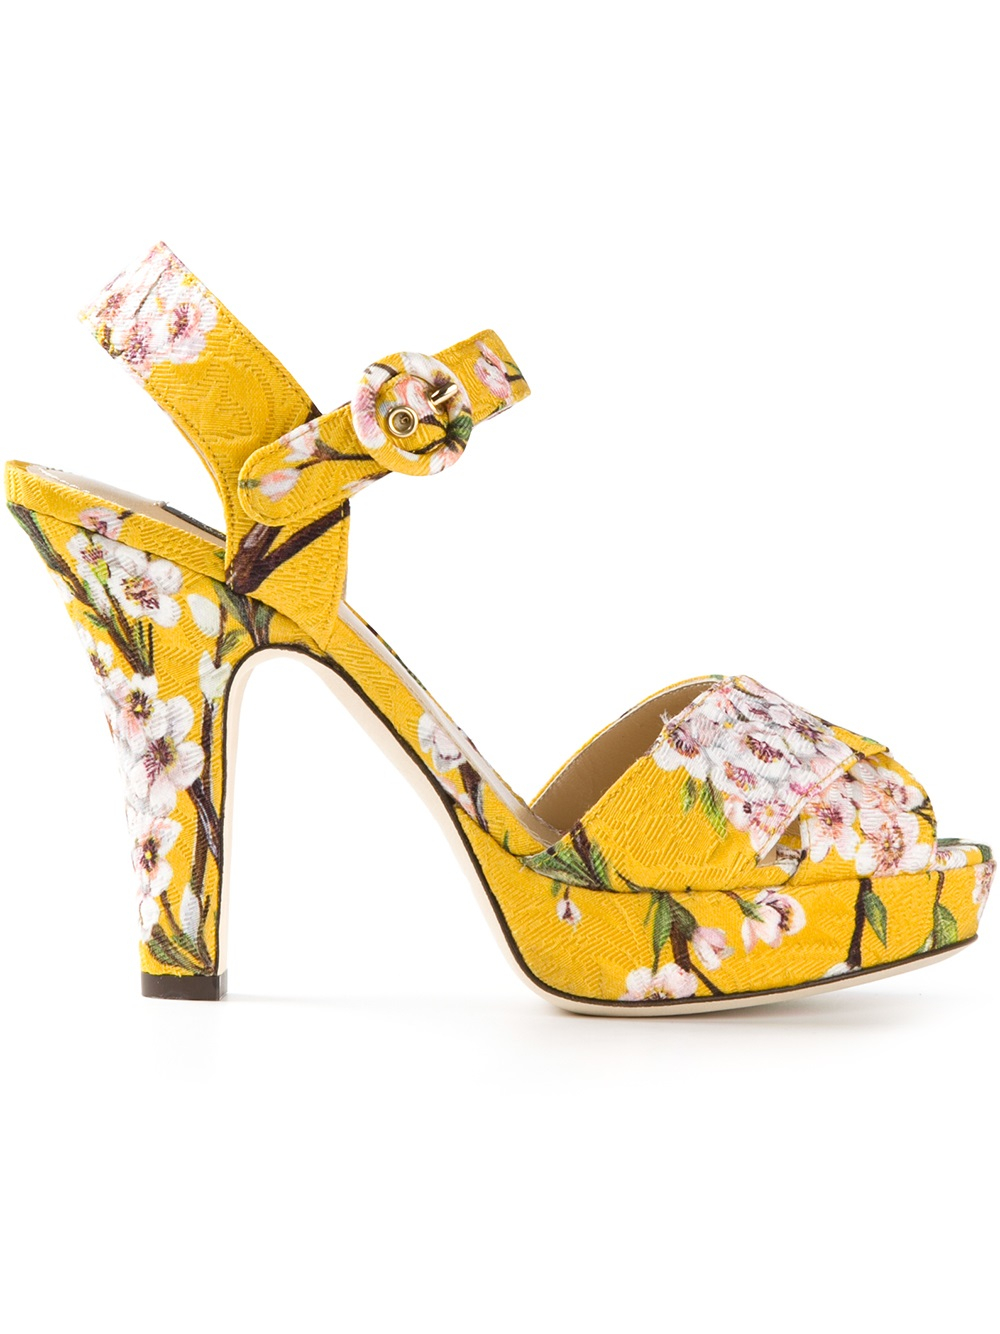 Dolce & gabbana Floral Print Sandal in Yellow | Lyst